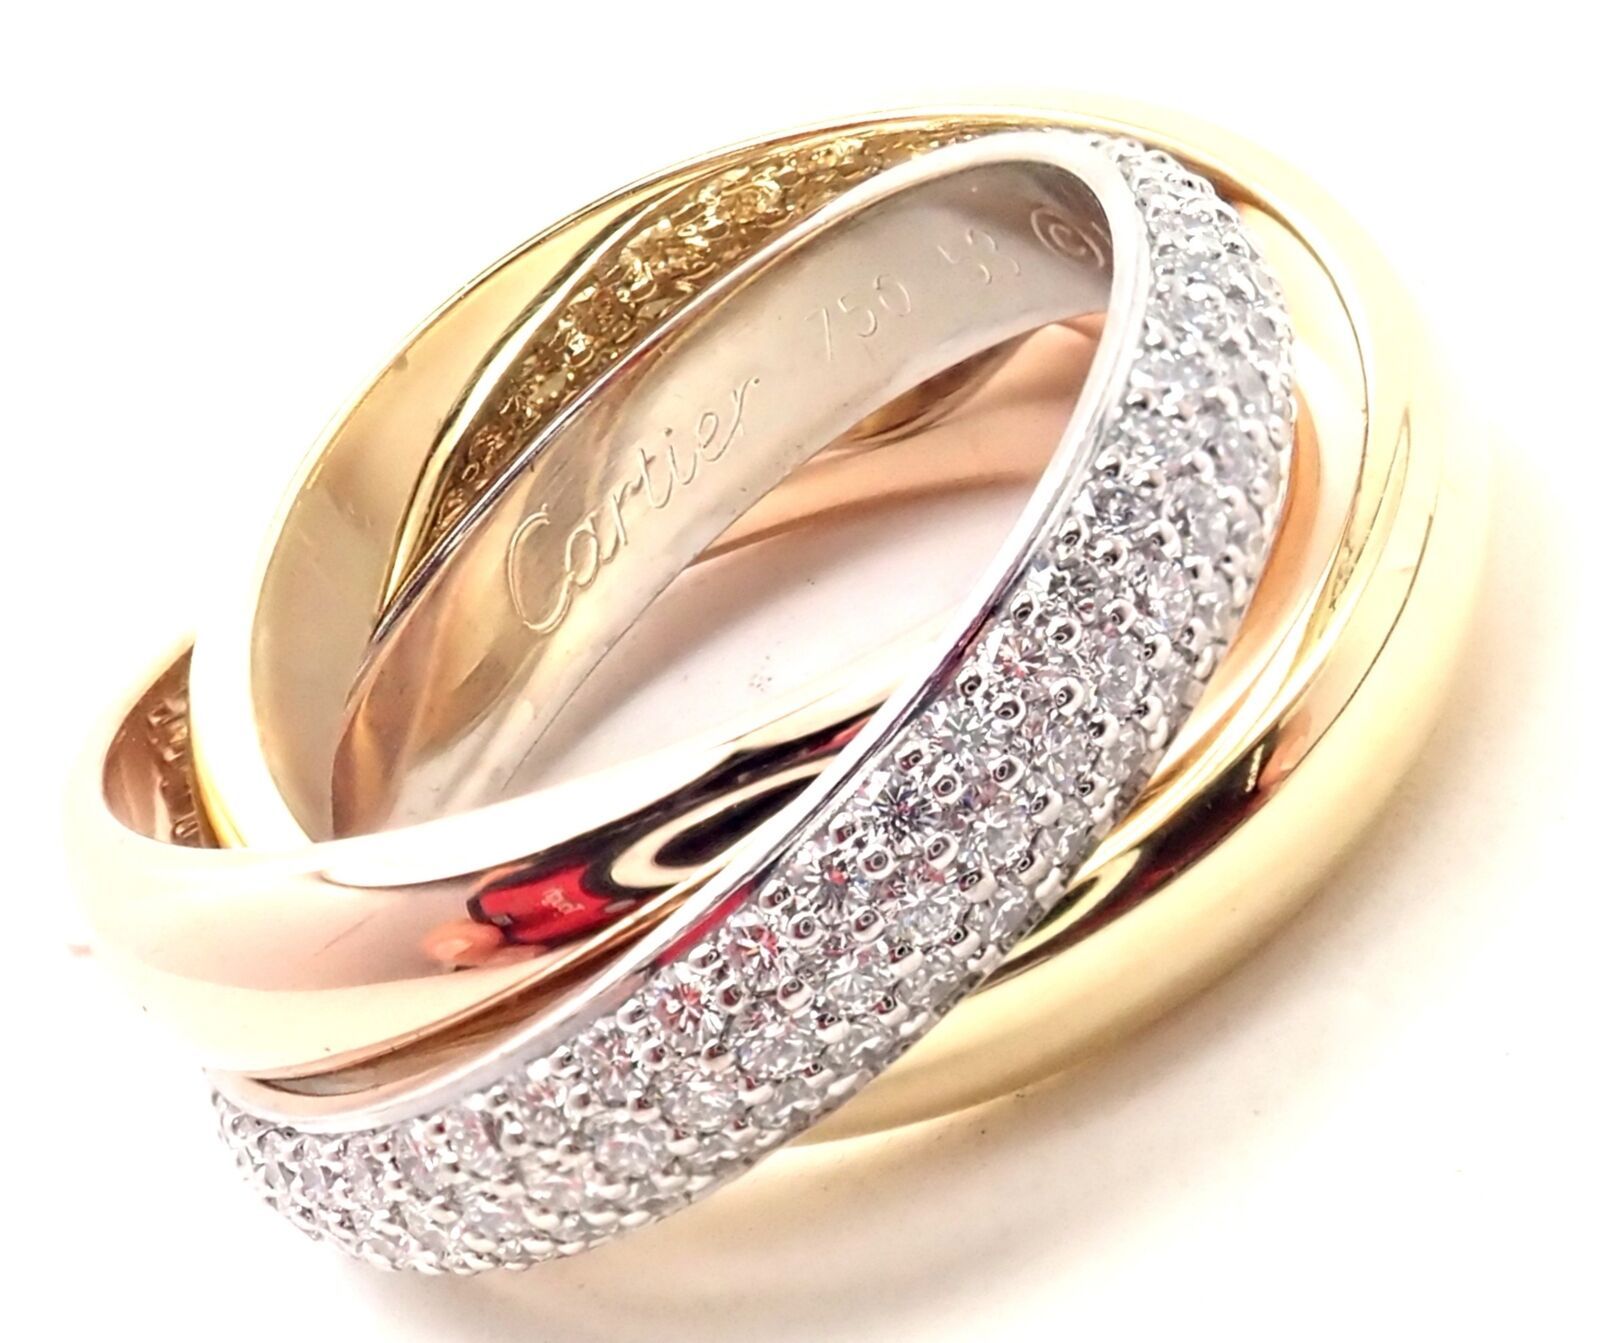 Authentic! Cartier Trinity Classic Diamond 18k White Yellow Rose Gold Band Ring - $12,390.00